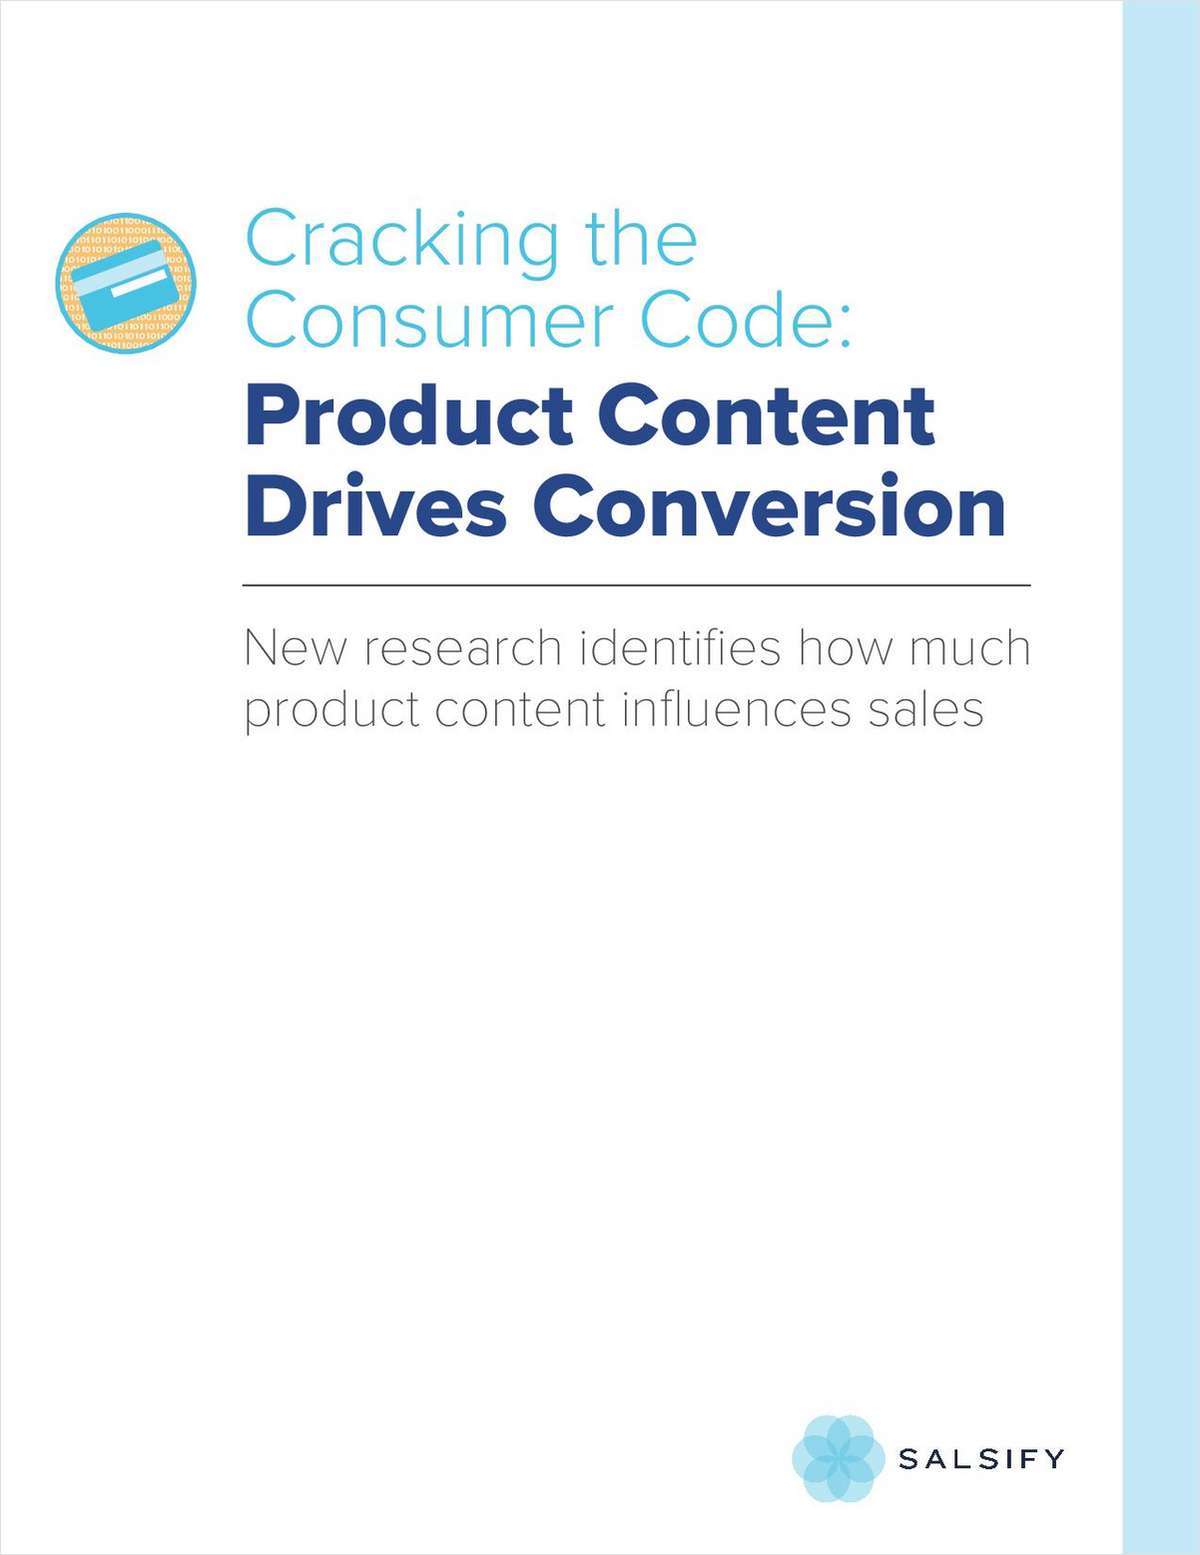 New Research Identifies How Much Product Content Influences Sales